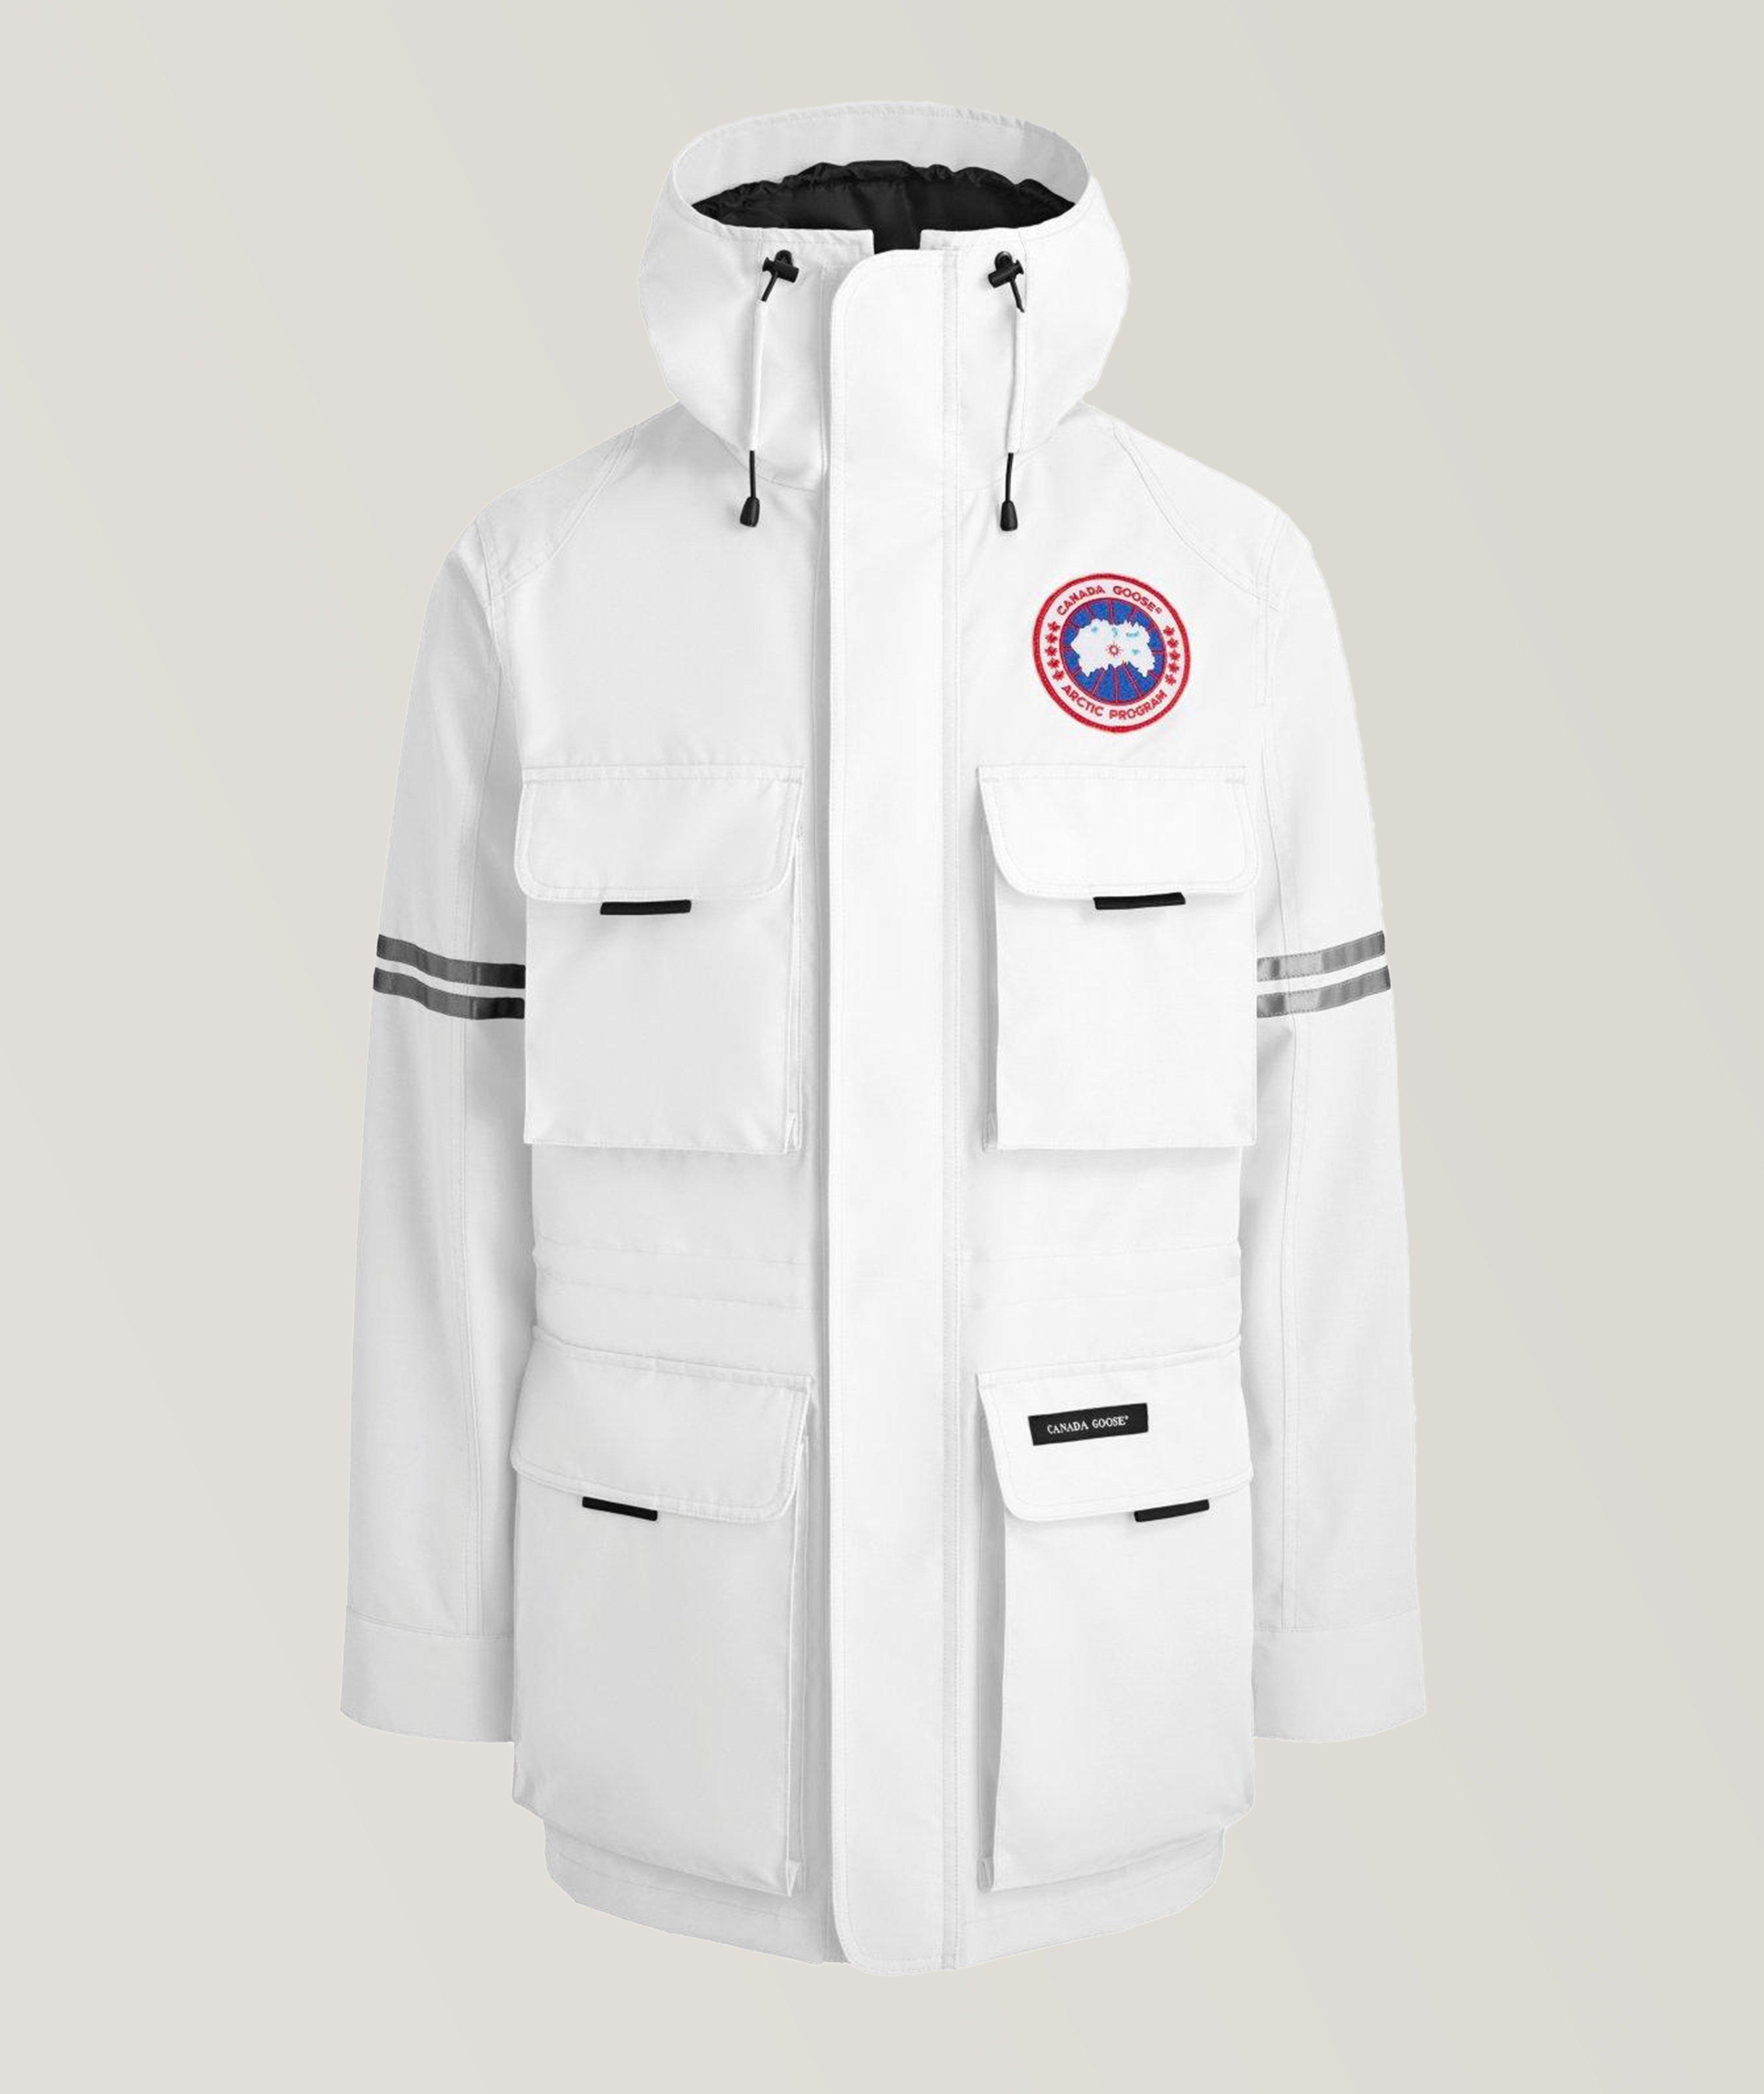 Science Research Jacket image 0